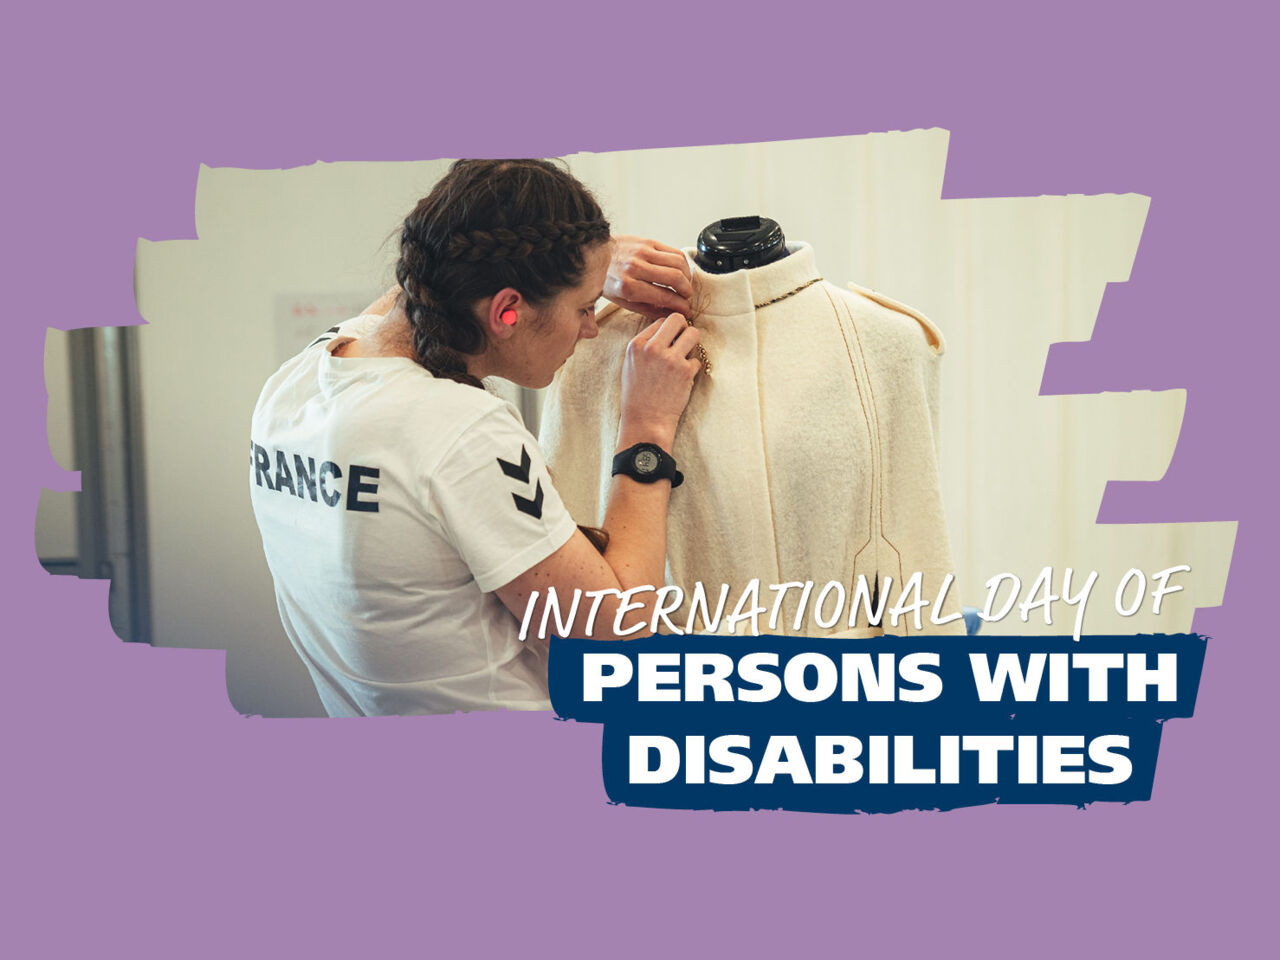 Skills know no bounds: International Day for Persons with Disabilities